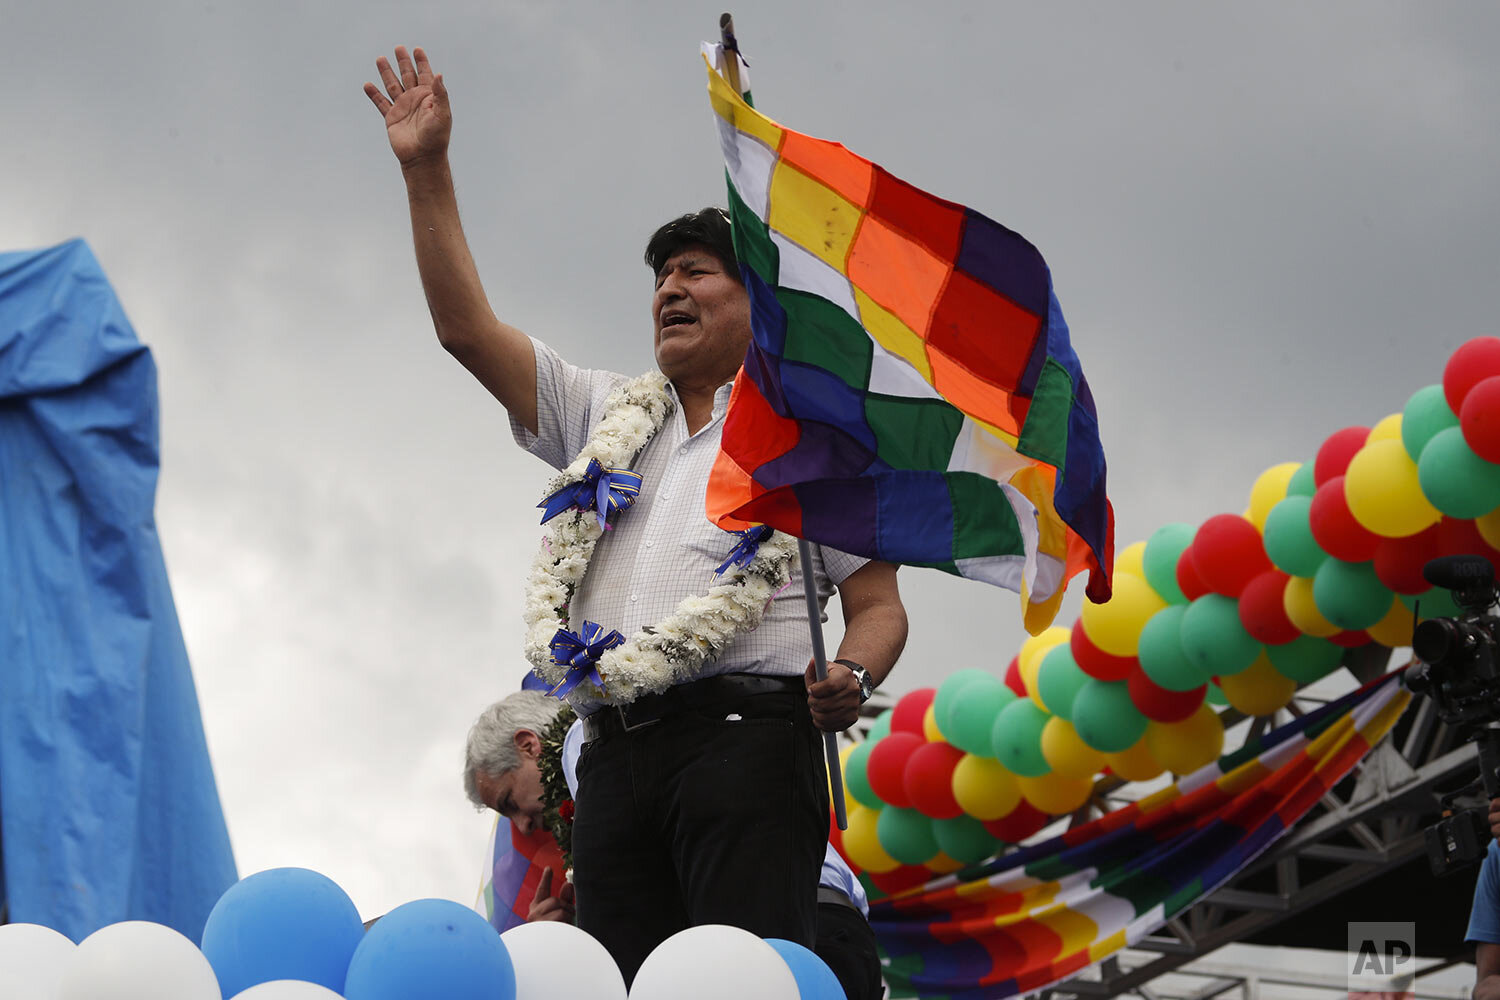  Former Bolivian President Evo Morales waves to supporters during a welcome rally in Chimore, Cochabamba province, Bolivia, Wednesday, Nov. 11, 2020, two days after returning from exile following an election that returned his socialist party to power